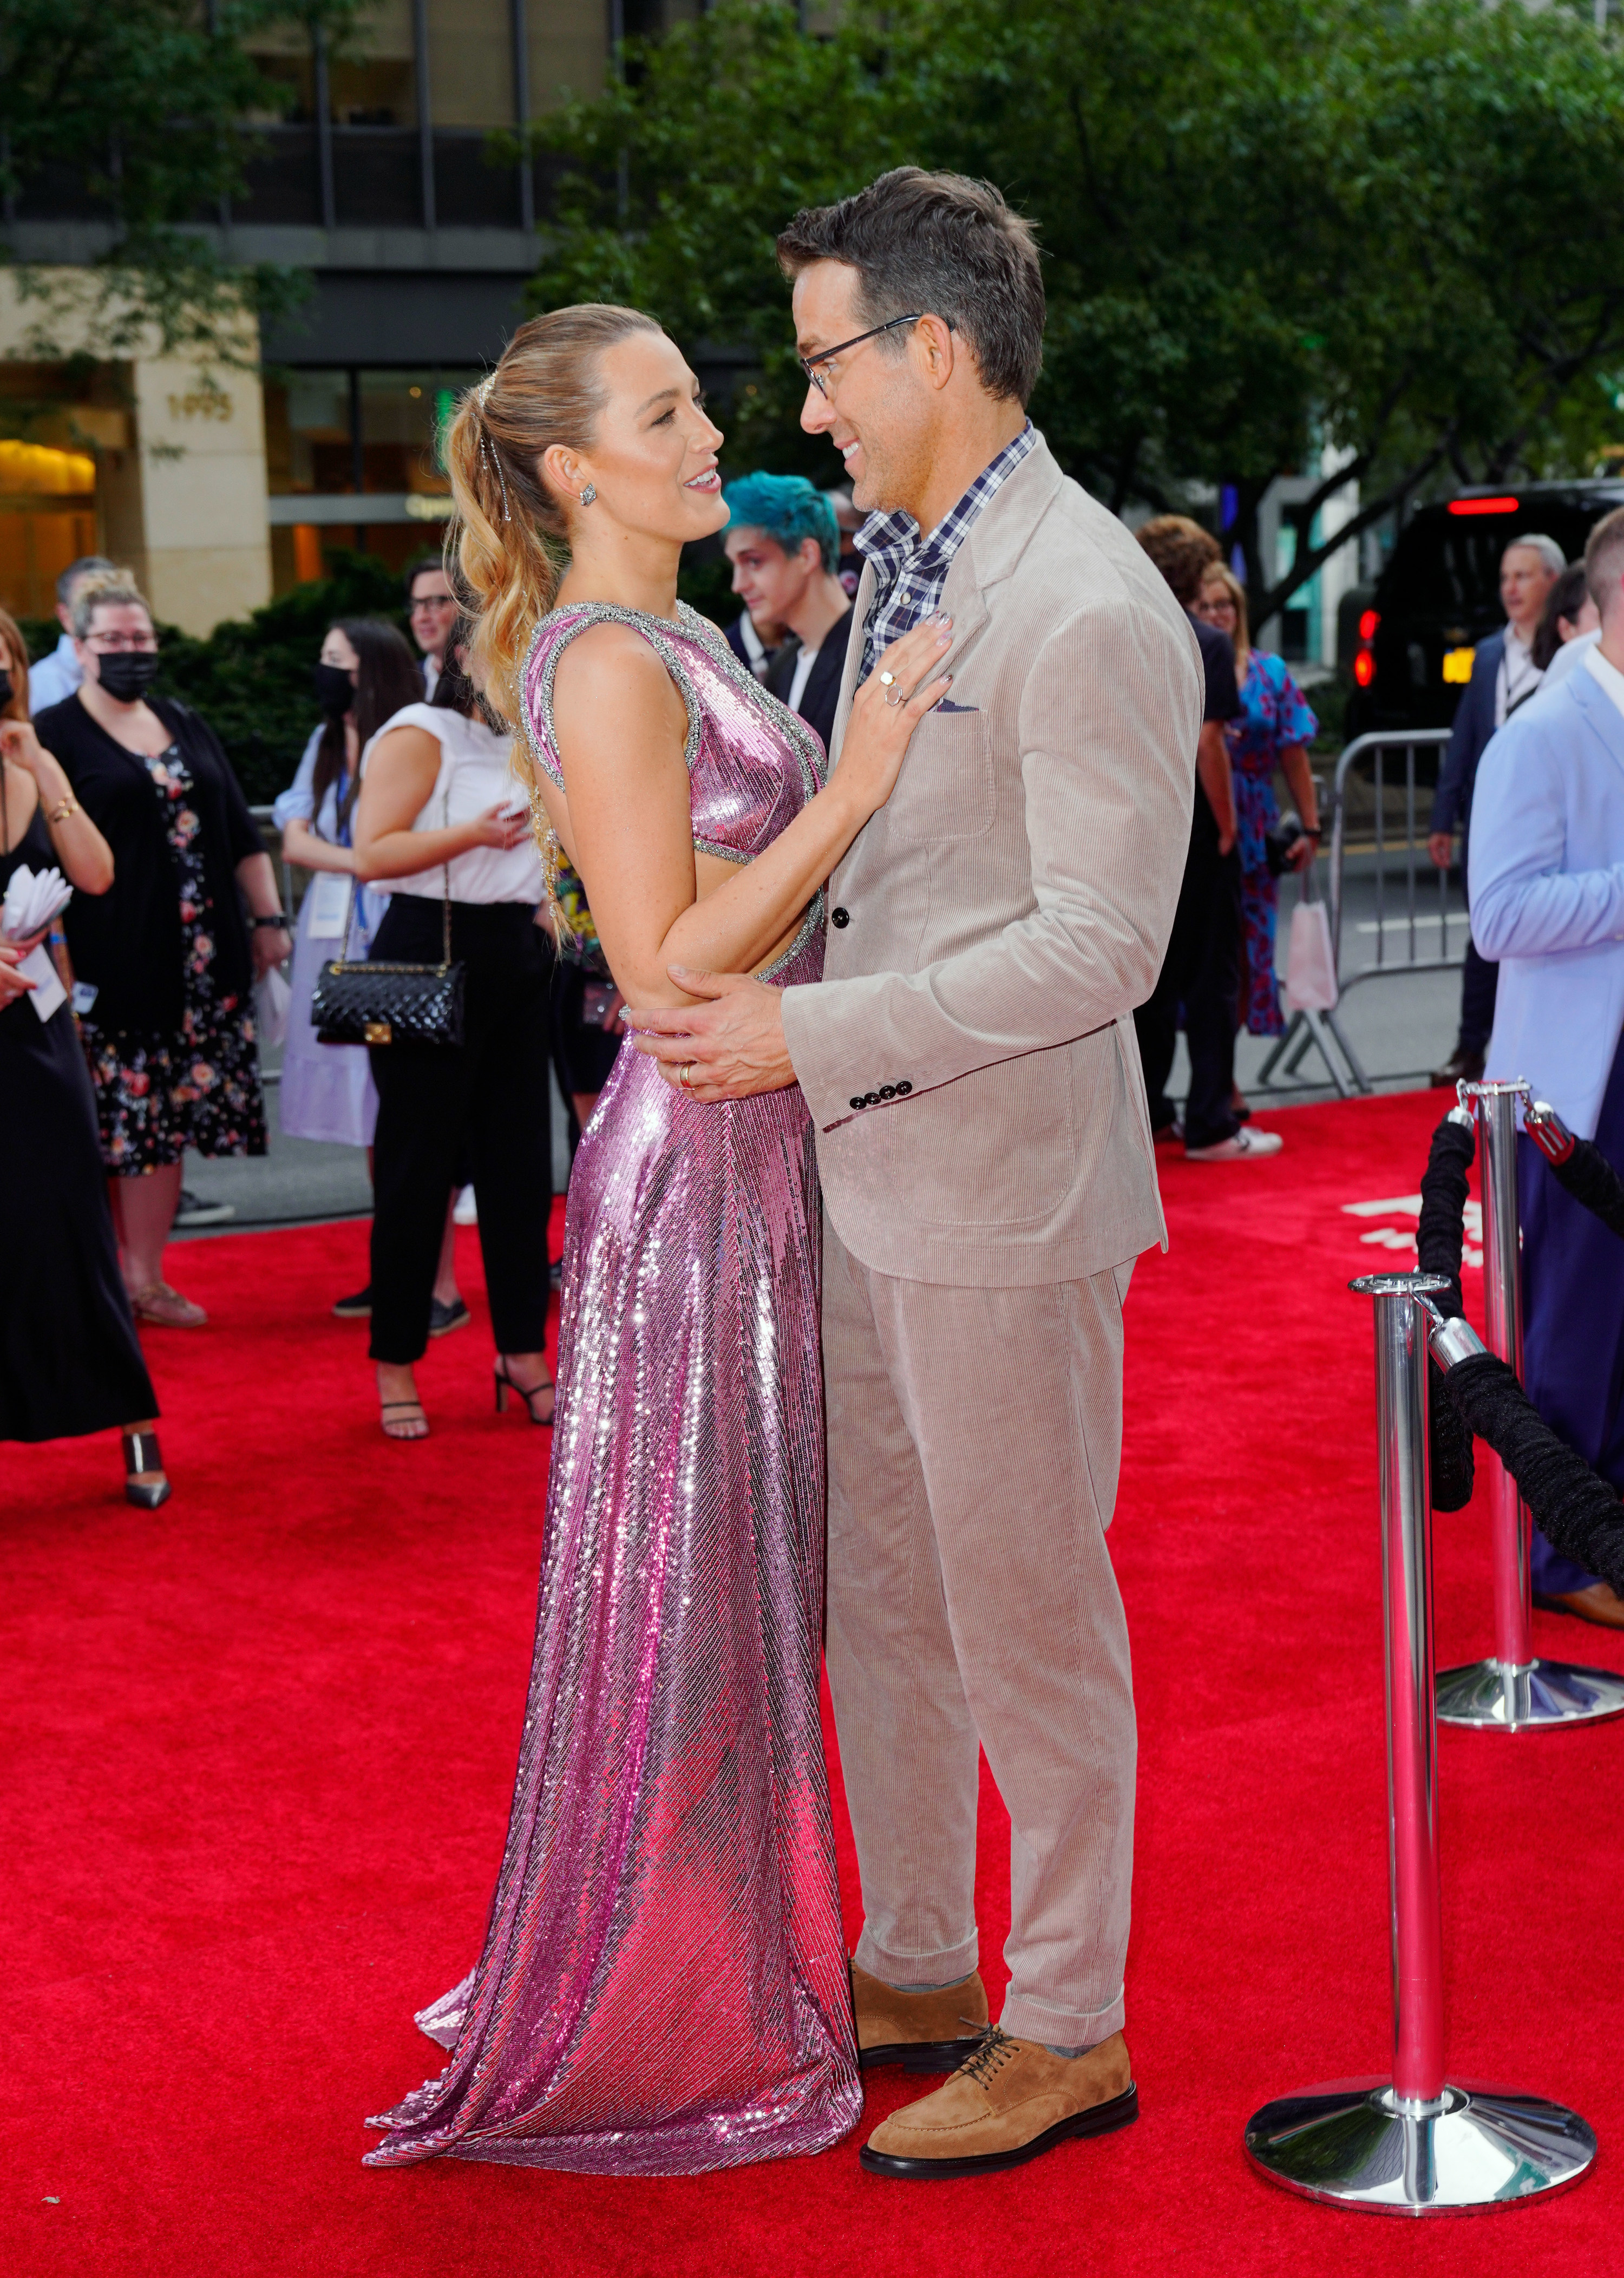 Blake Lively resting her hand of Ryan Reynolds chest, while he holds her at a red carpet premier